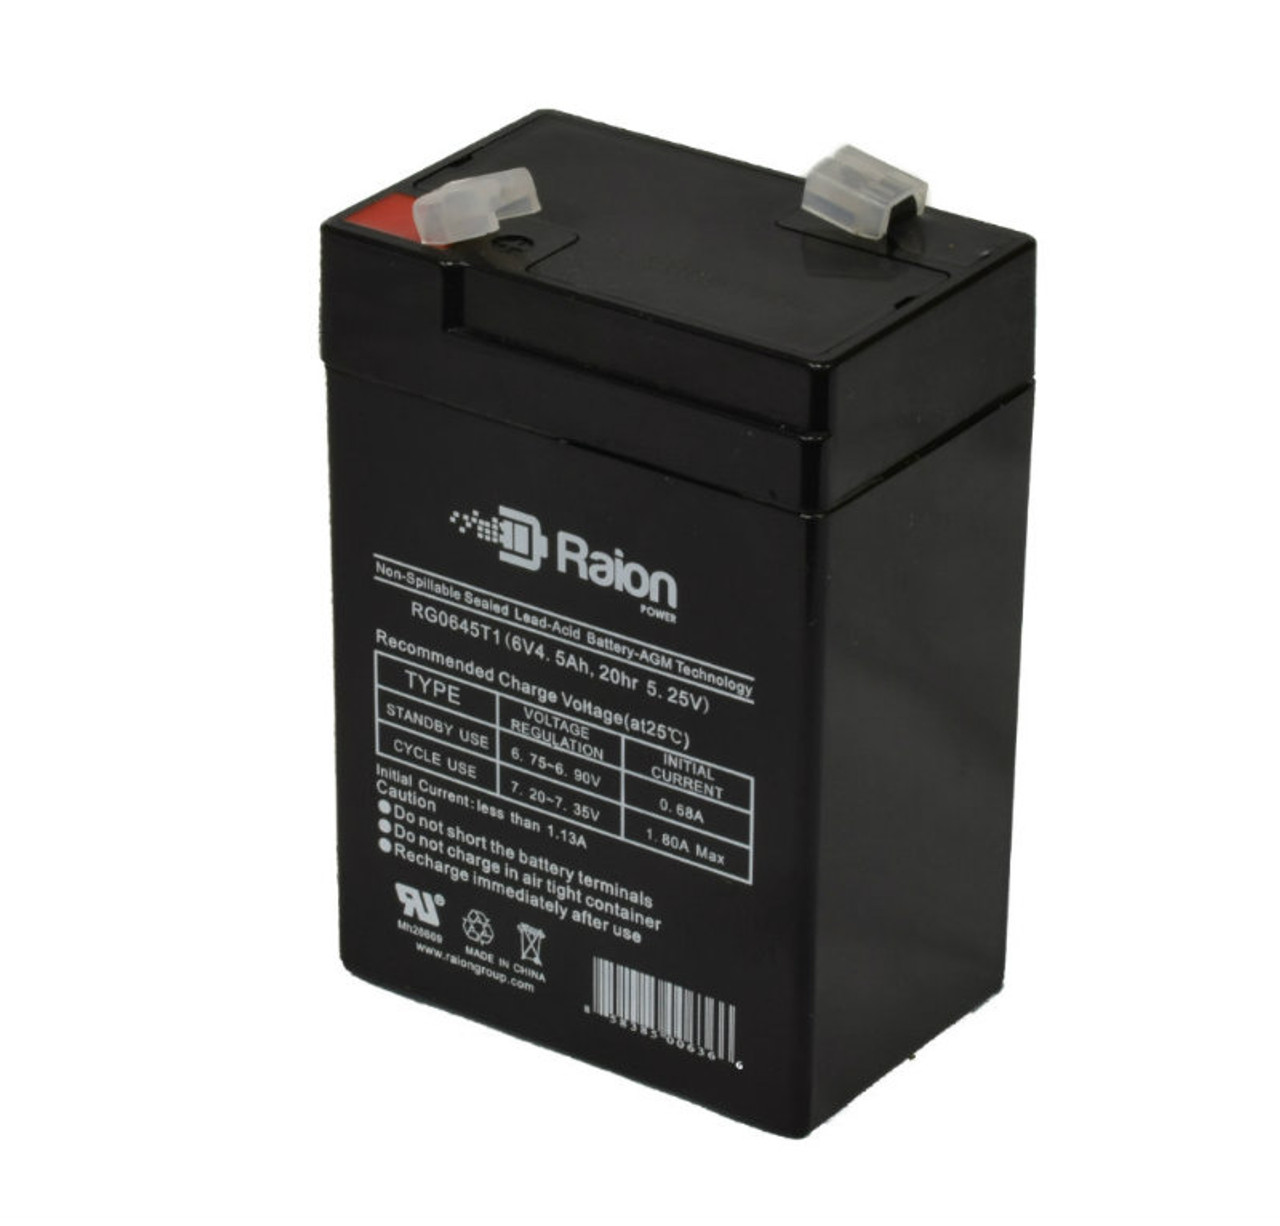 Raion Power RG0645T1 6V 4.5Ah Replacement Battery Cartridge for Lithonia H2NS1R